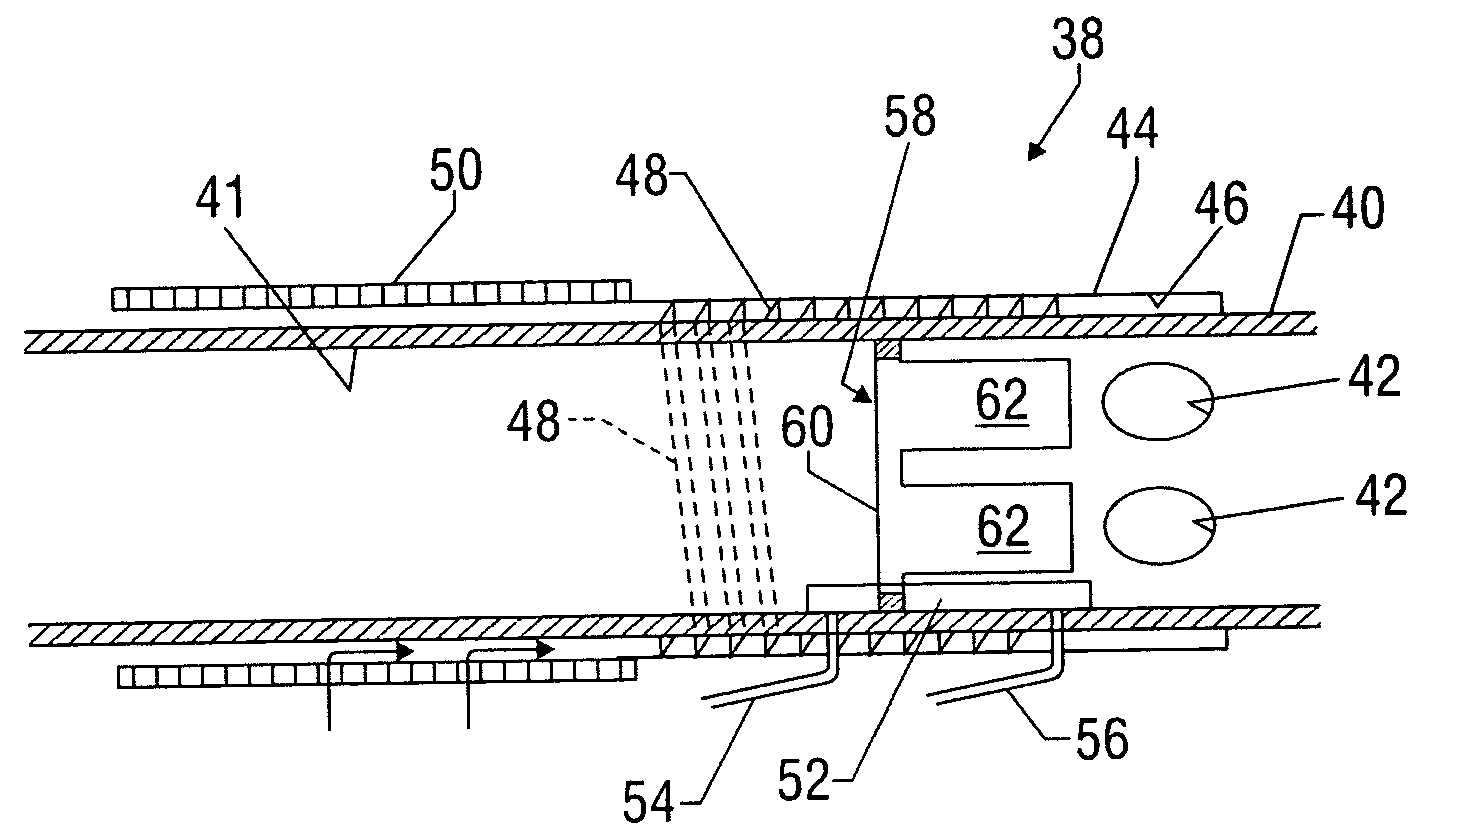 Downhole inflow control device with shut-off feature